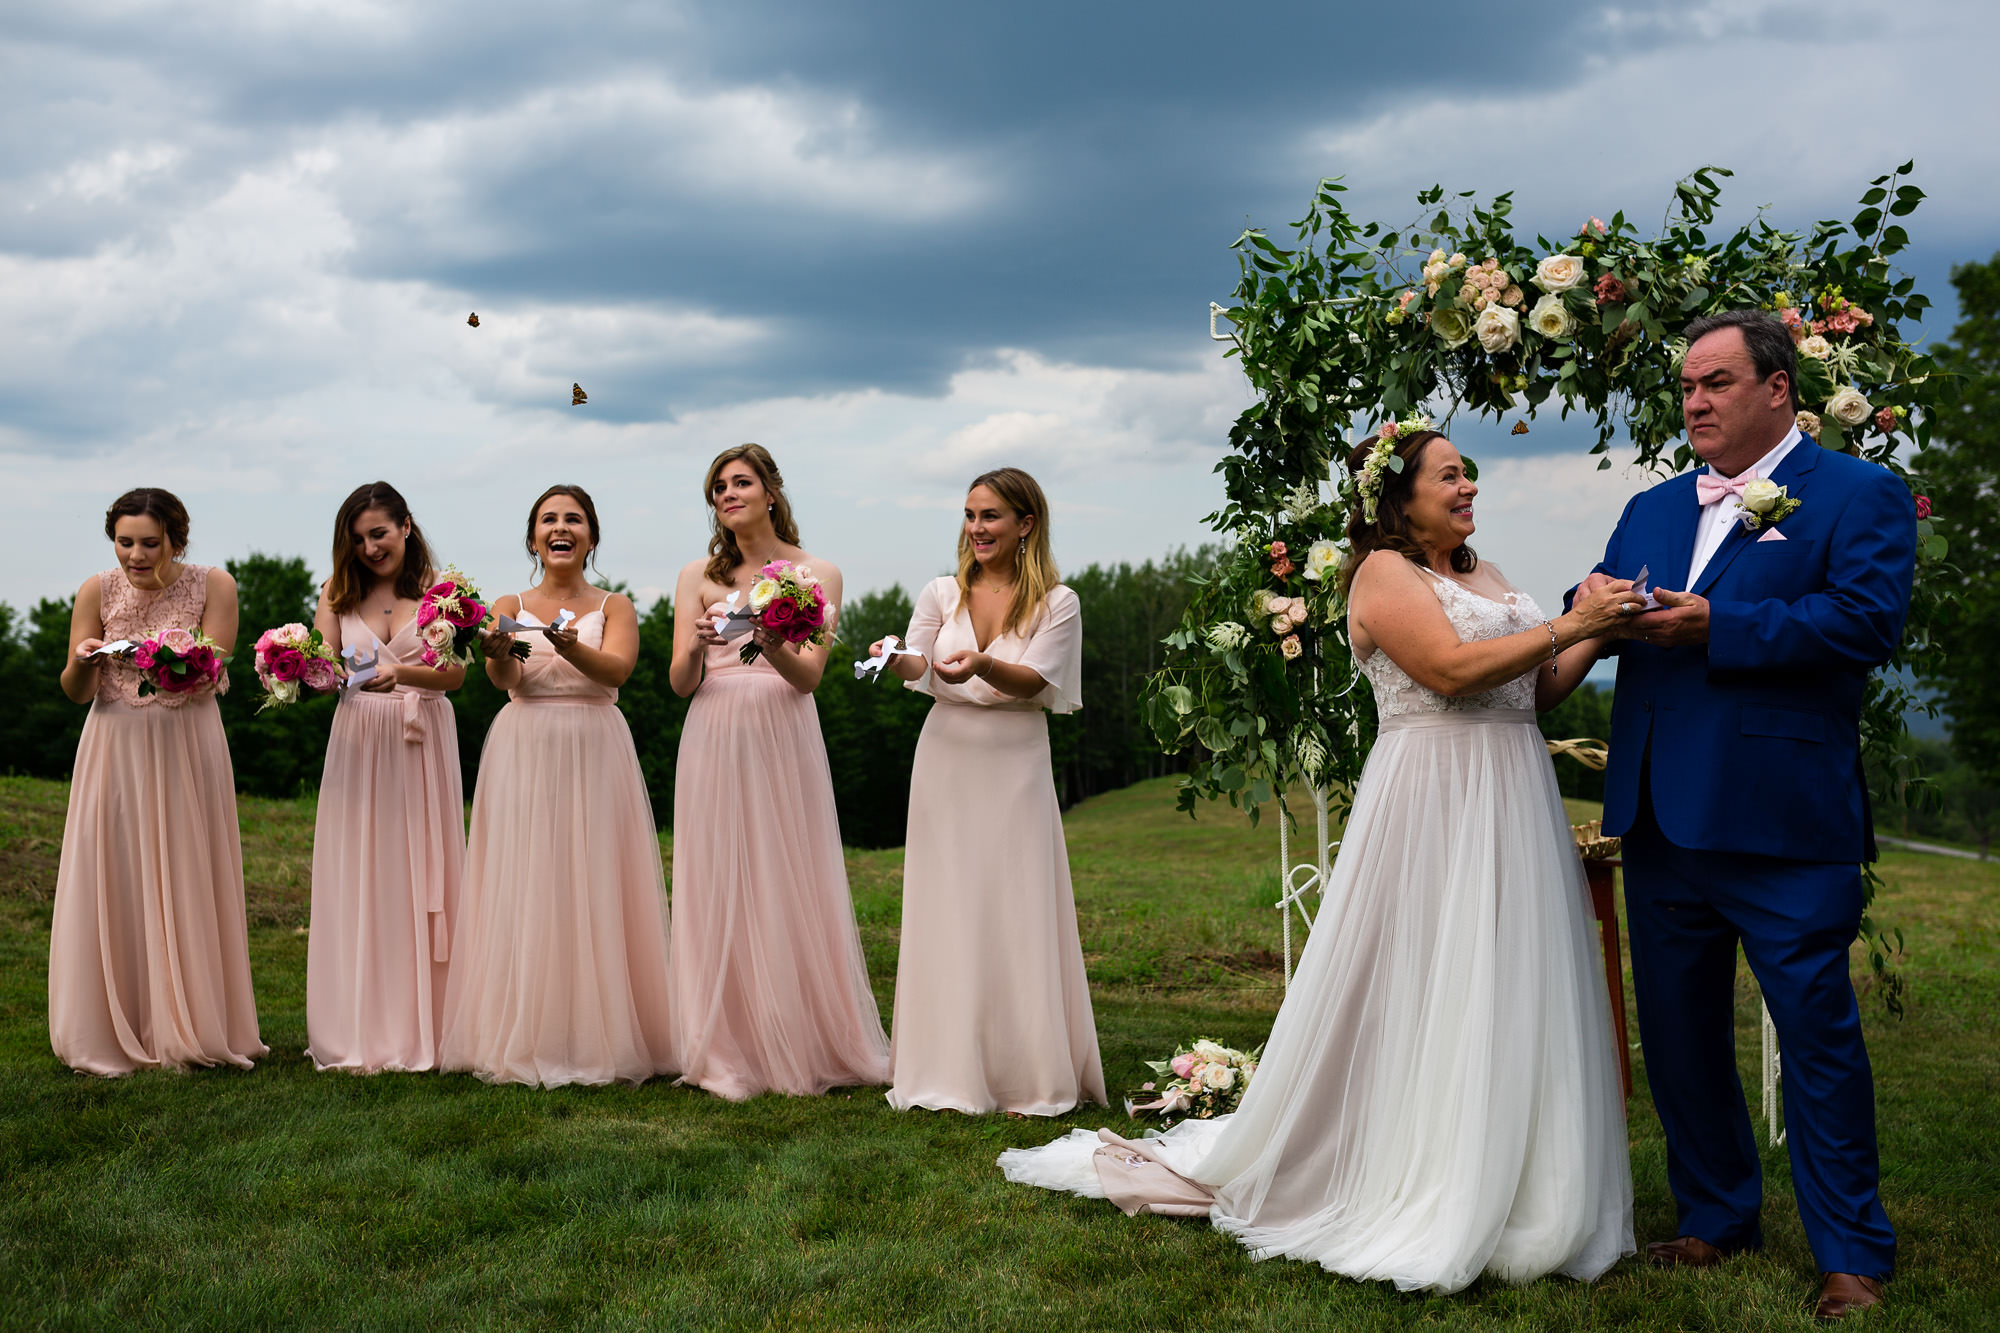 The wedding party released butterflies during their private residence wedding